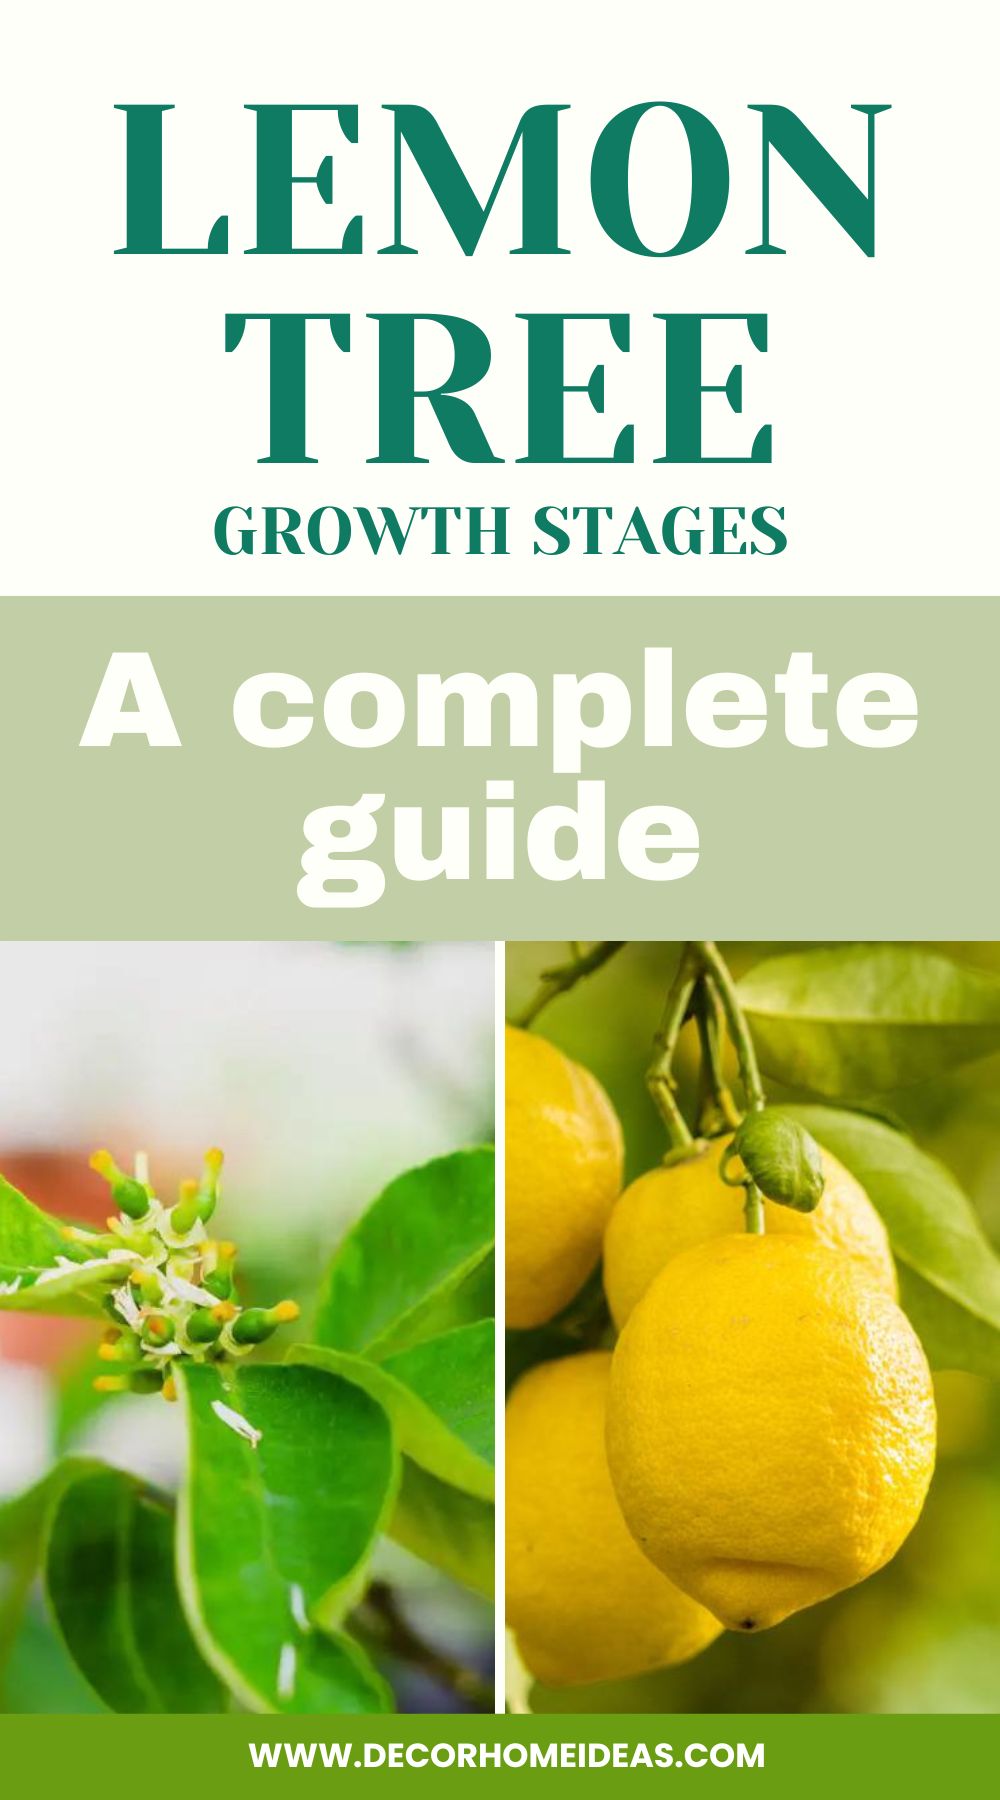 Unlock the secrets of lemon tree growth stages with this comprehensive guide. From germination to maturity, learn about each crucial stage in the life cycle of lemon trees, enabling you to nurture and care for them effectively, resulting in a fruitful and thriving citrus garden.